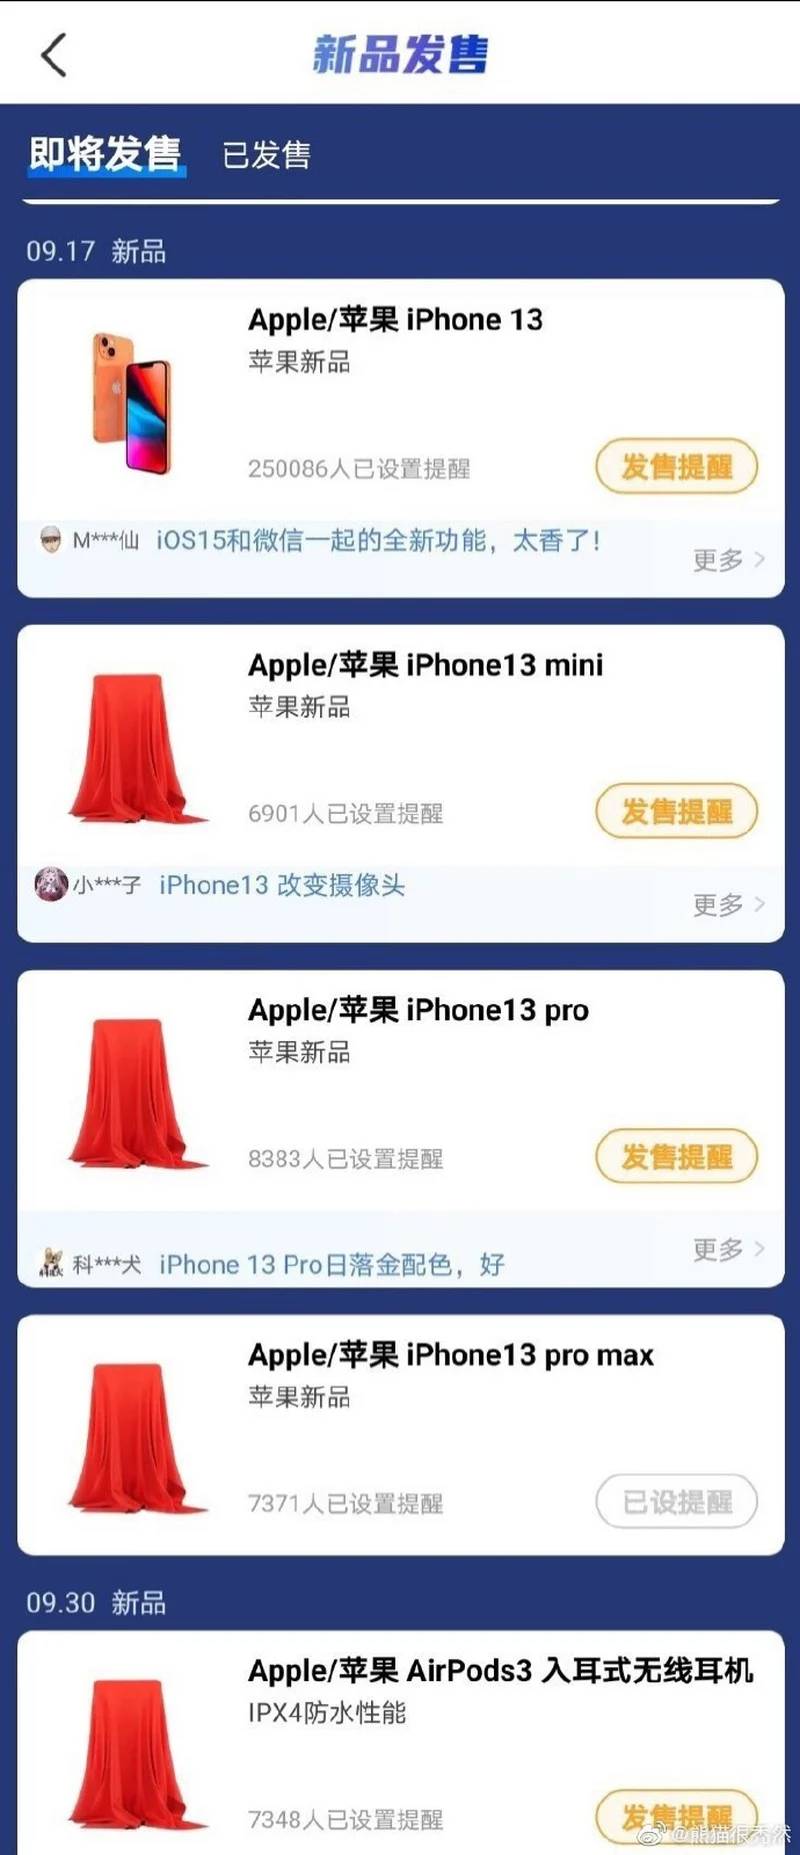 Launch of iPhone 13 September